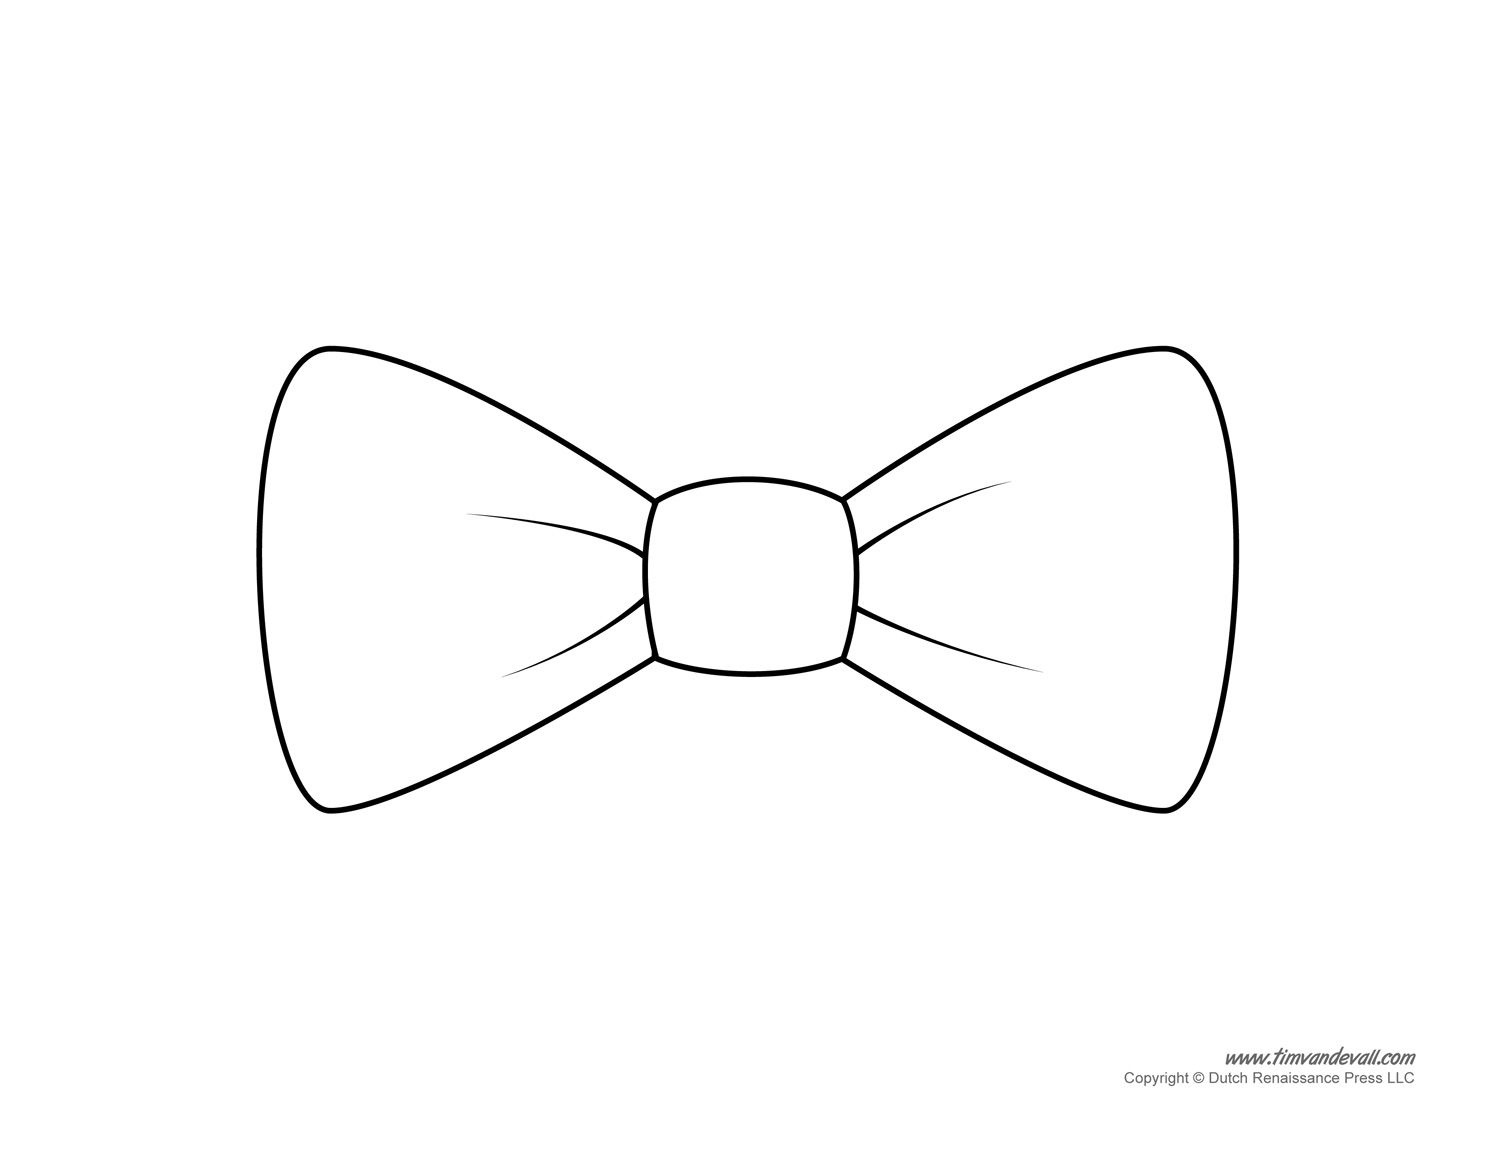 Bow Tie Drawing | Paper Bow Tie Templates |Bow Tie Printables - Free Bow Tie Template Printable